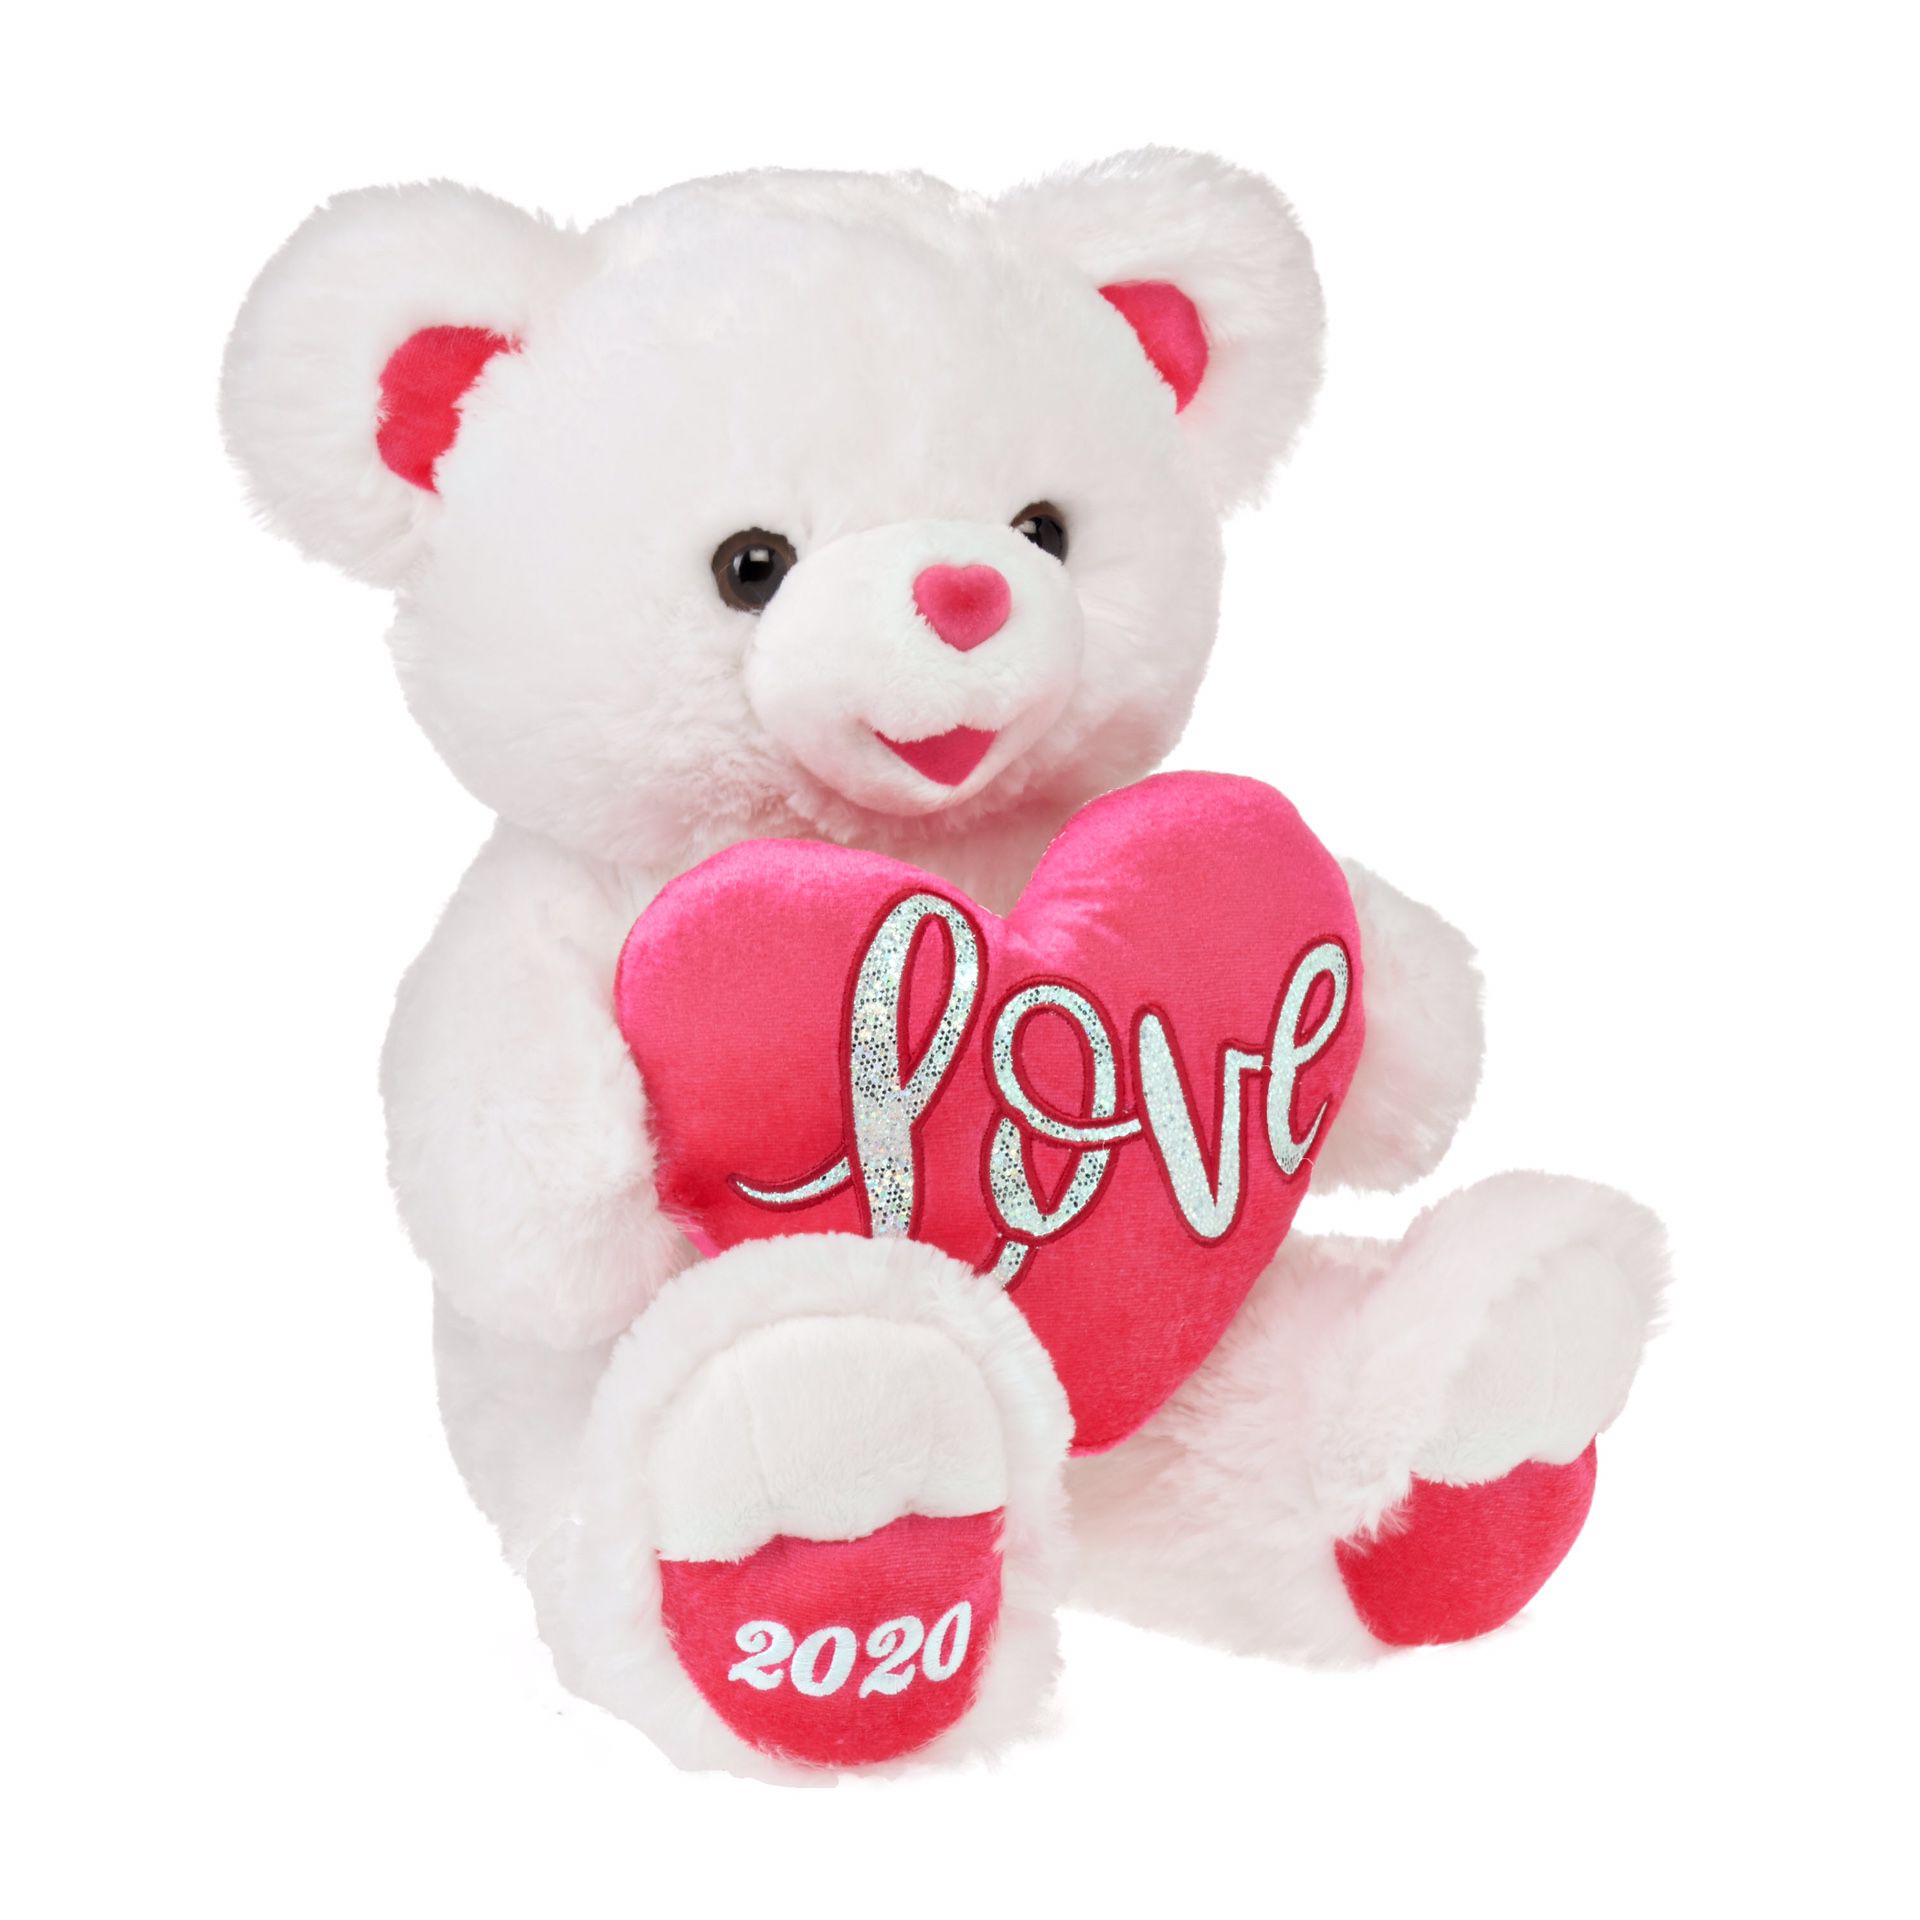 Valentine's Day White and Pink Sweetheart Teddy Bear Gift Present For Your Special Someone